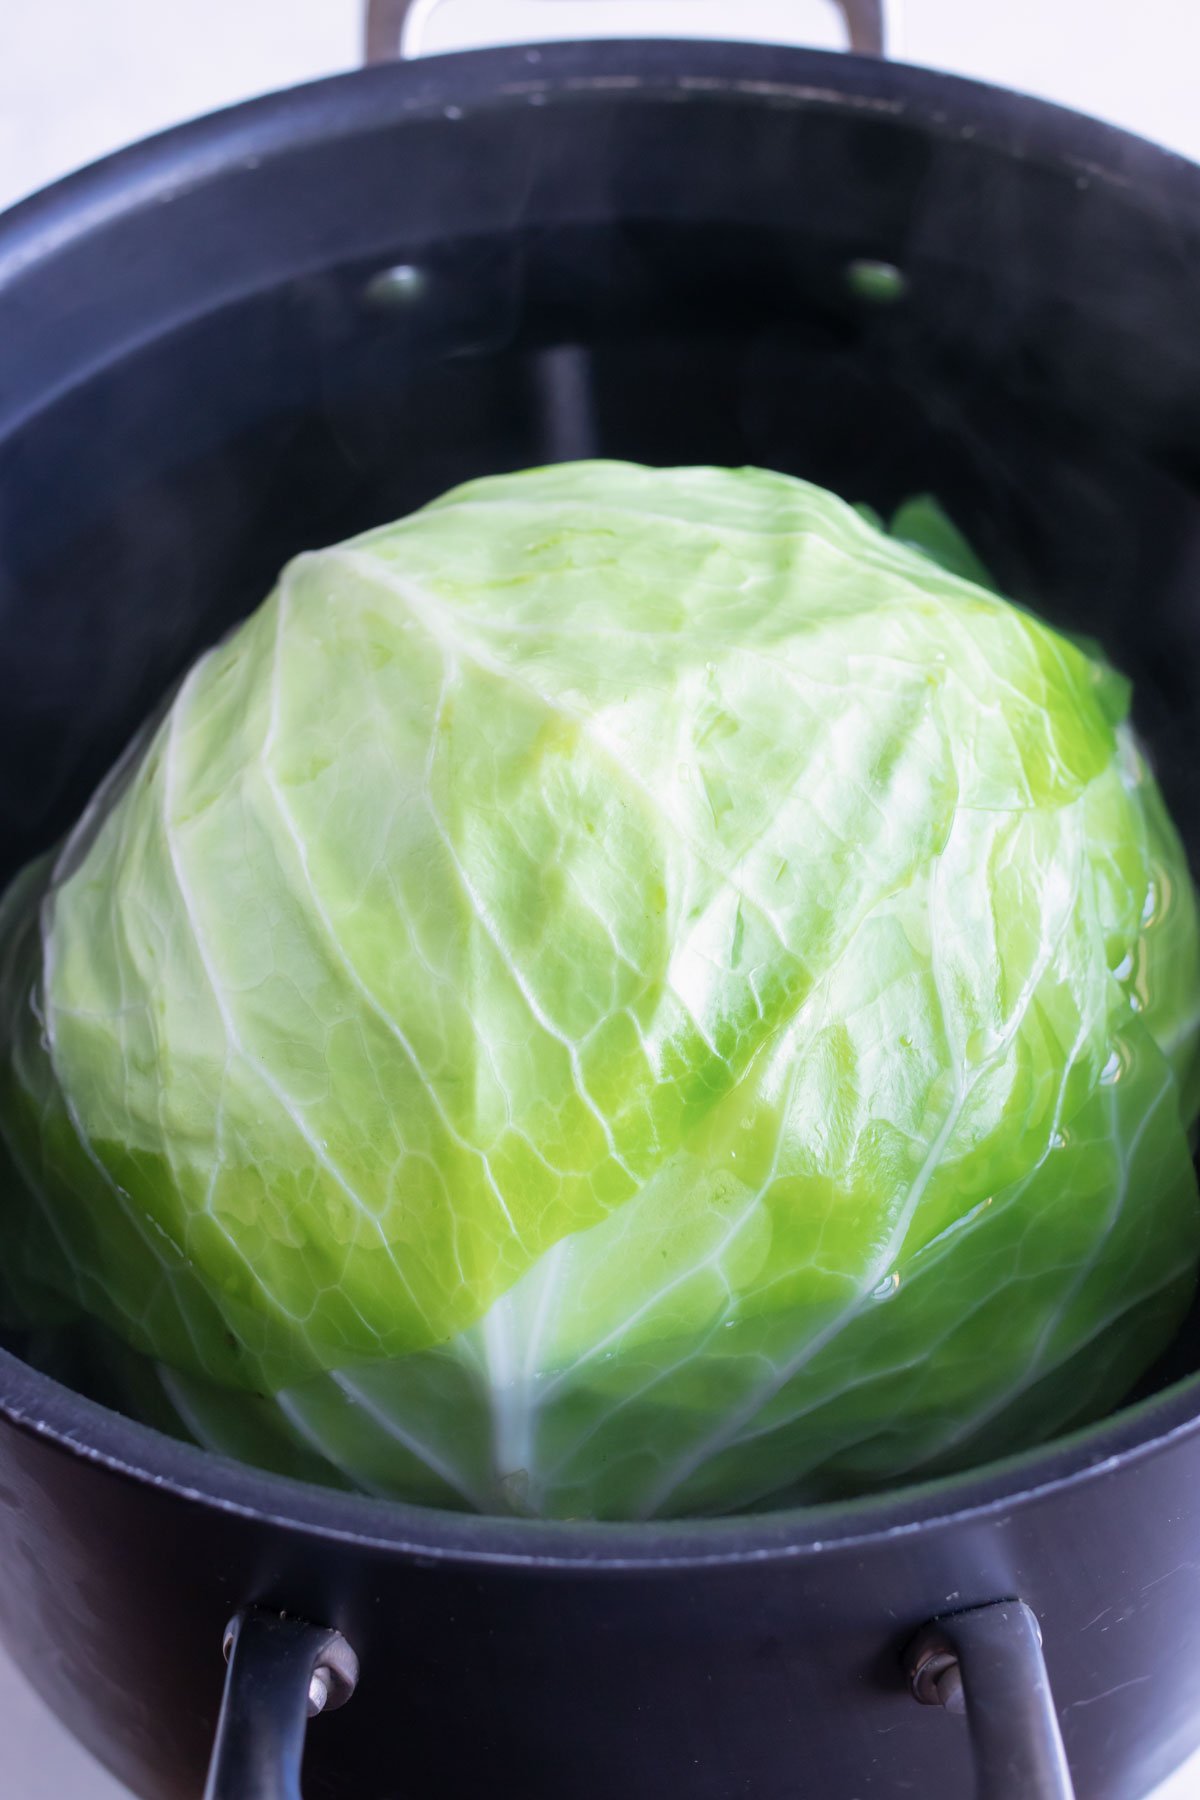 Cabbage head is par-boiled before separating leaves.